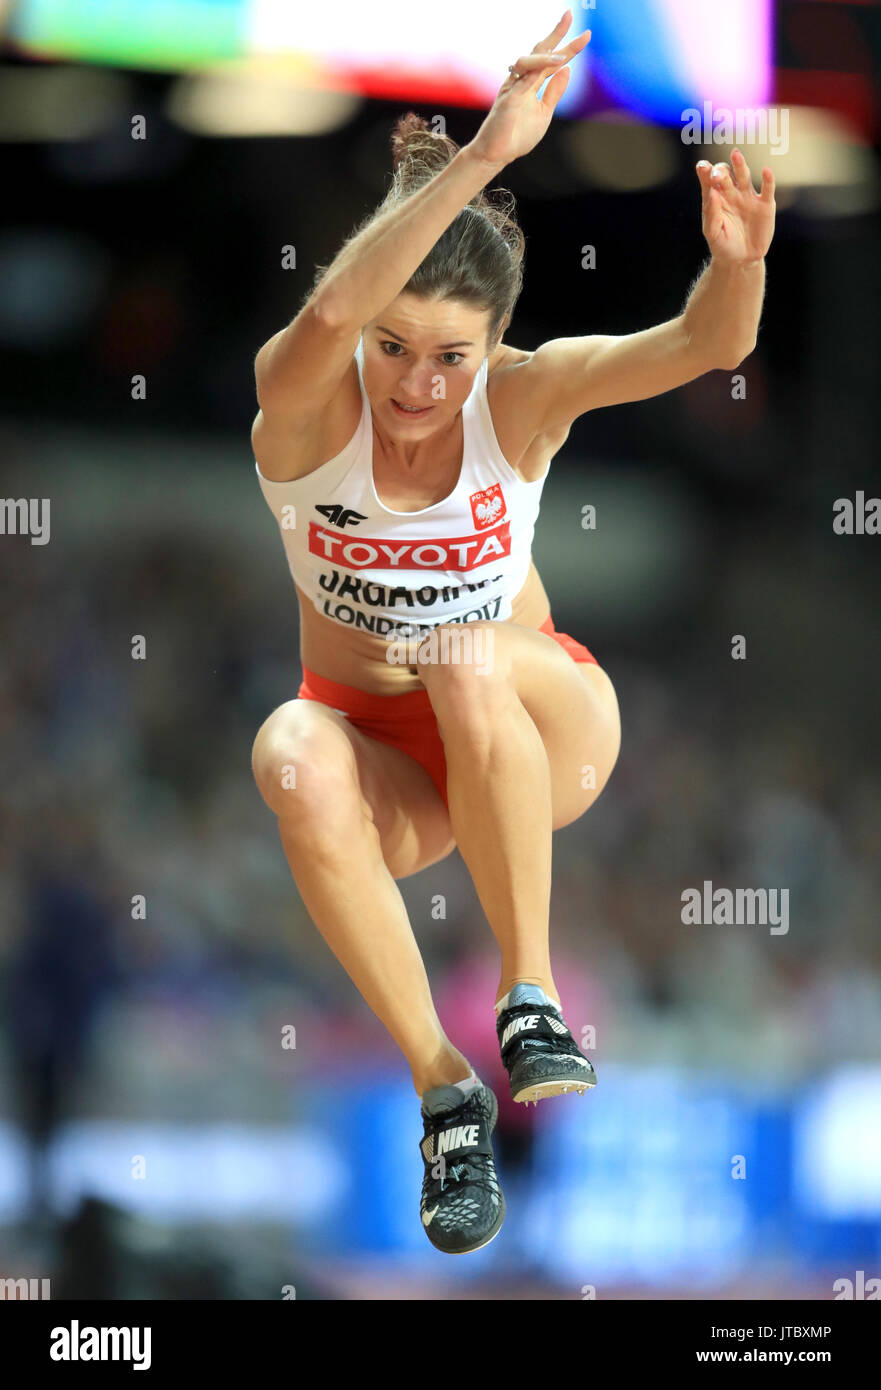 Poland's Anna Jagaciak in action during the Women's Triple Jump final during day four of the 2017 IAAF World Championships at the London Stadium. PRESS ASSOCIATION Photo. Picture date: Monday August 7, 2017. See PA story ATHLETICS World. Photo credit should read: Adam Davy/PA Wire. RESTRICTIONS: Editorial use only. No transmission of sound or moving images and no video simulation Stock Photo